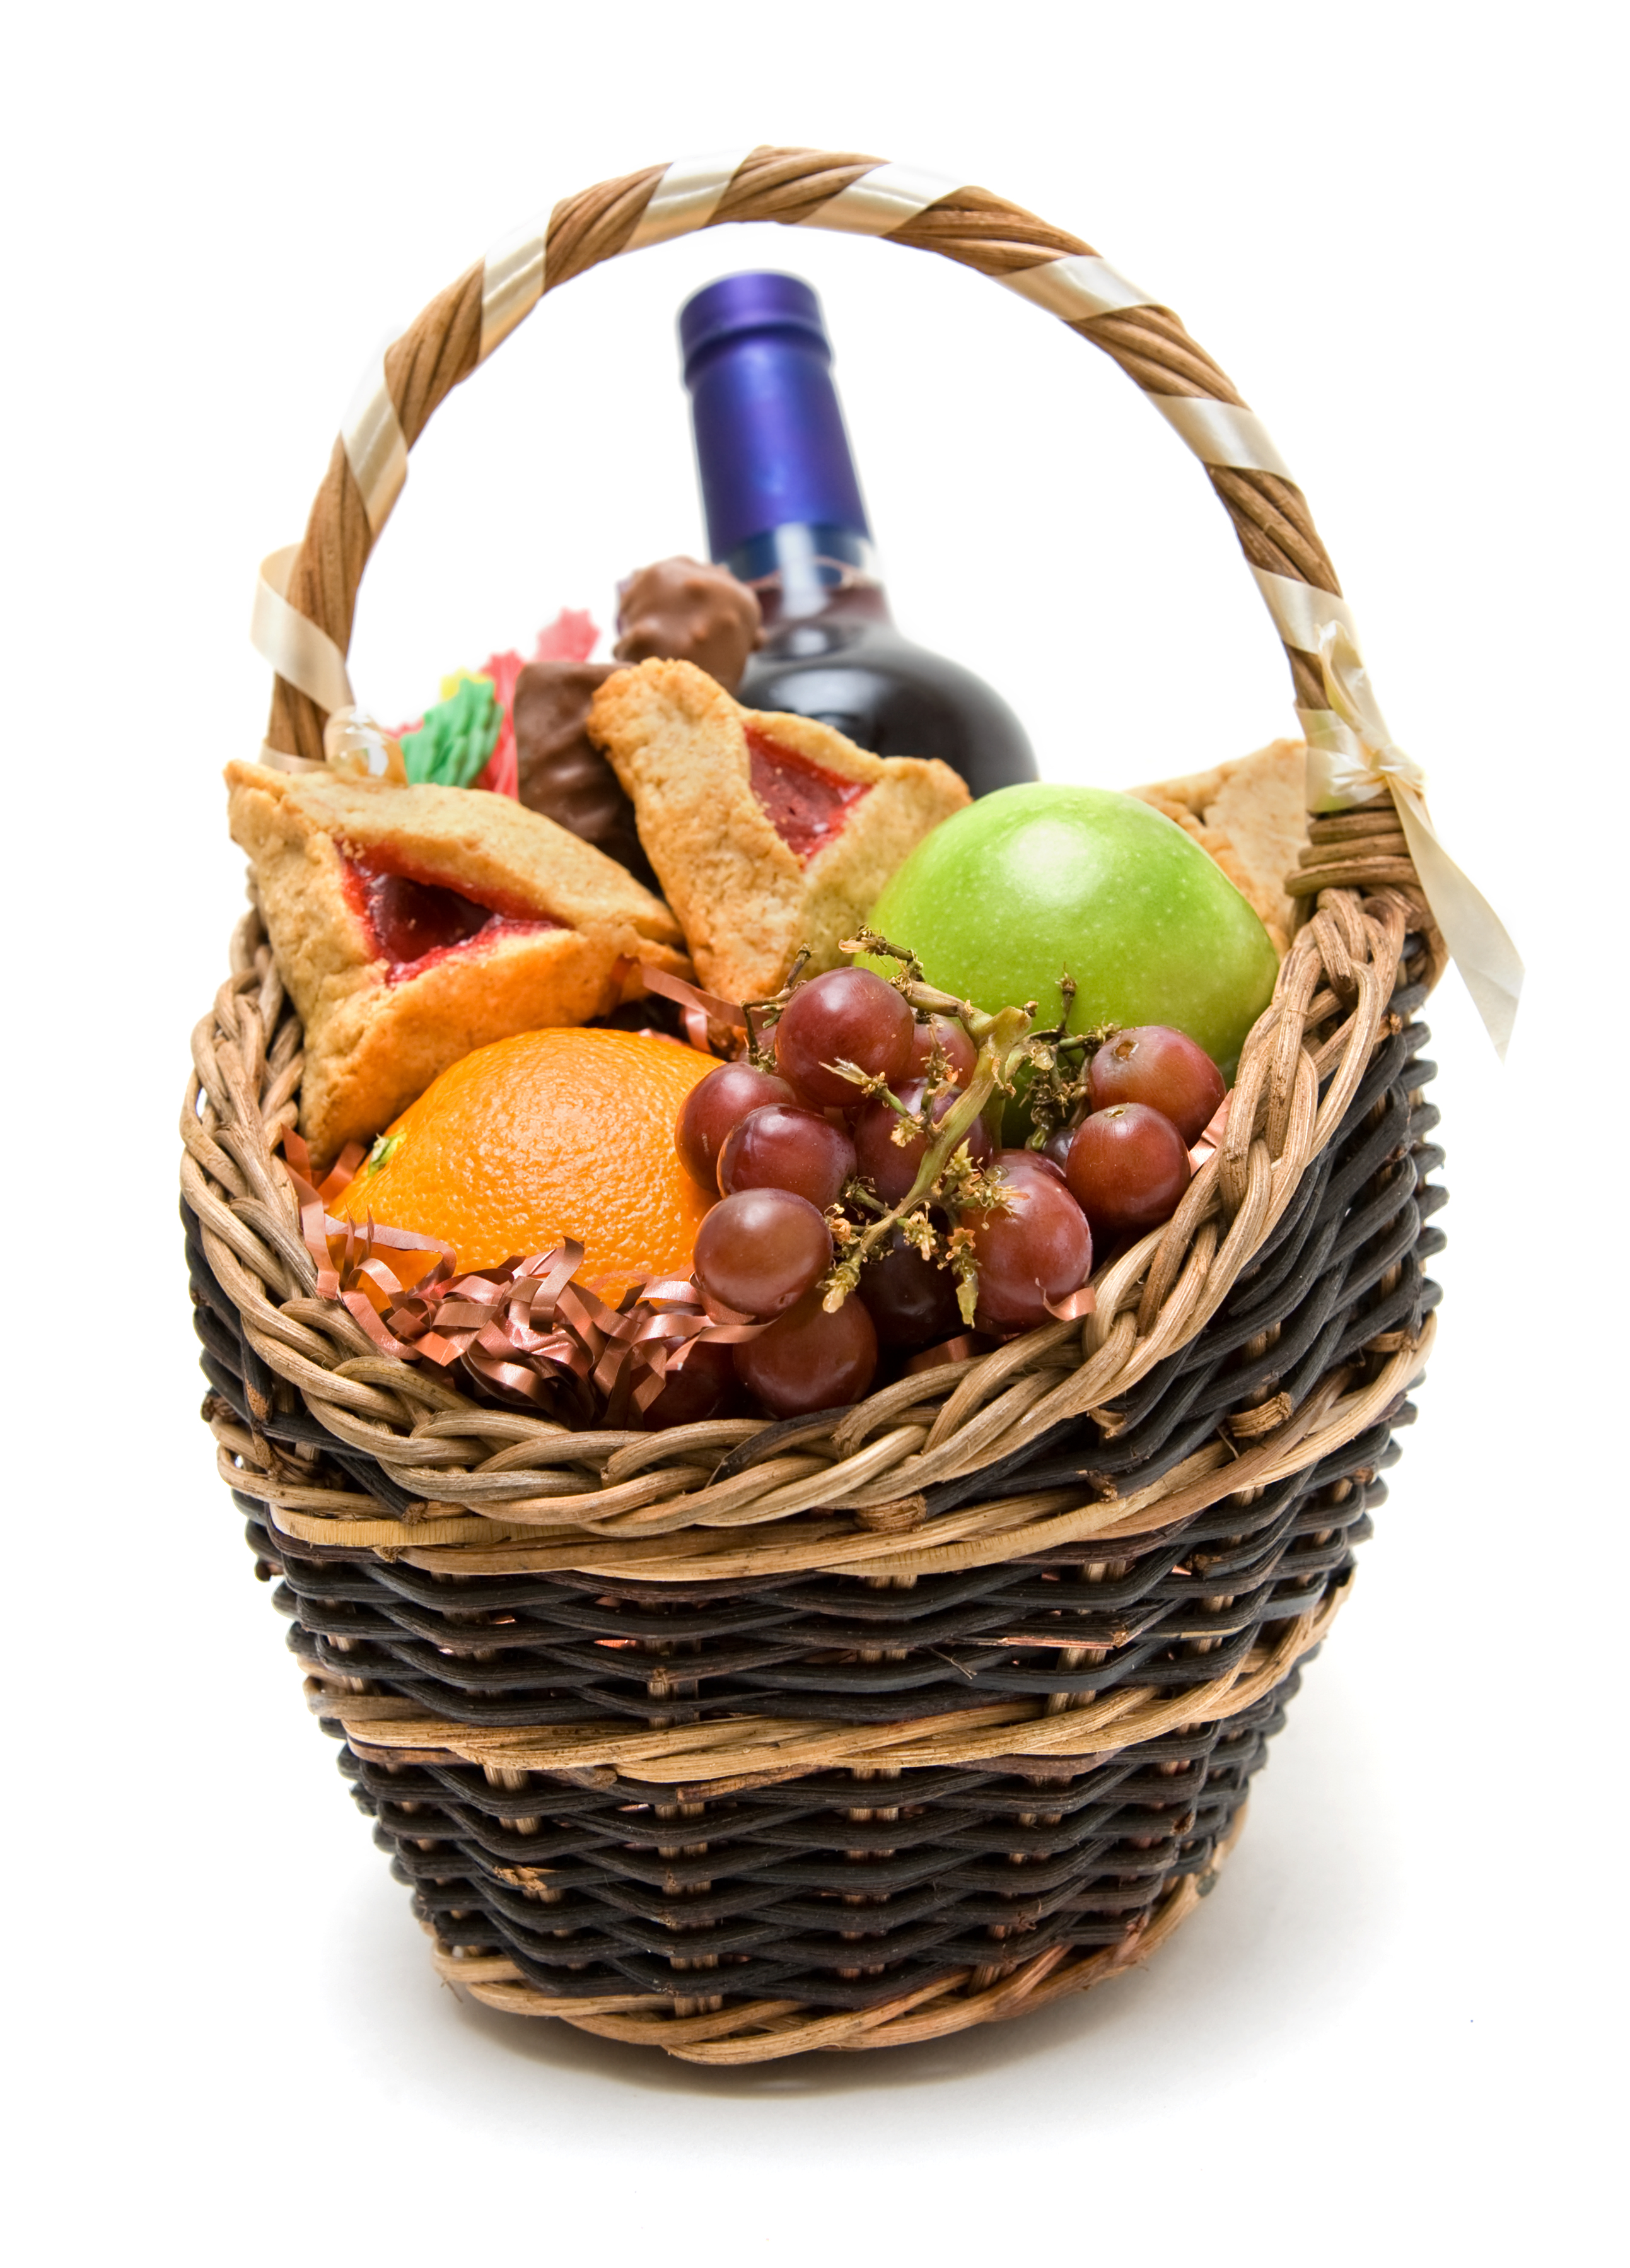 Purim basket with fruit, candy, wine and hamentaschen. (Tovfla—Getty Images/iStockphoto)